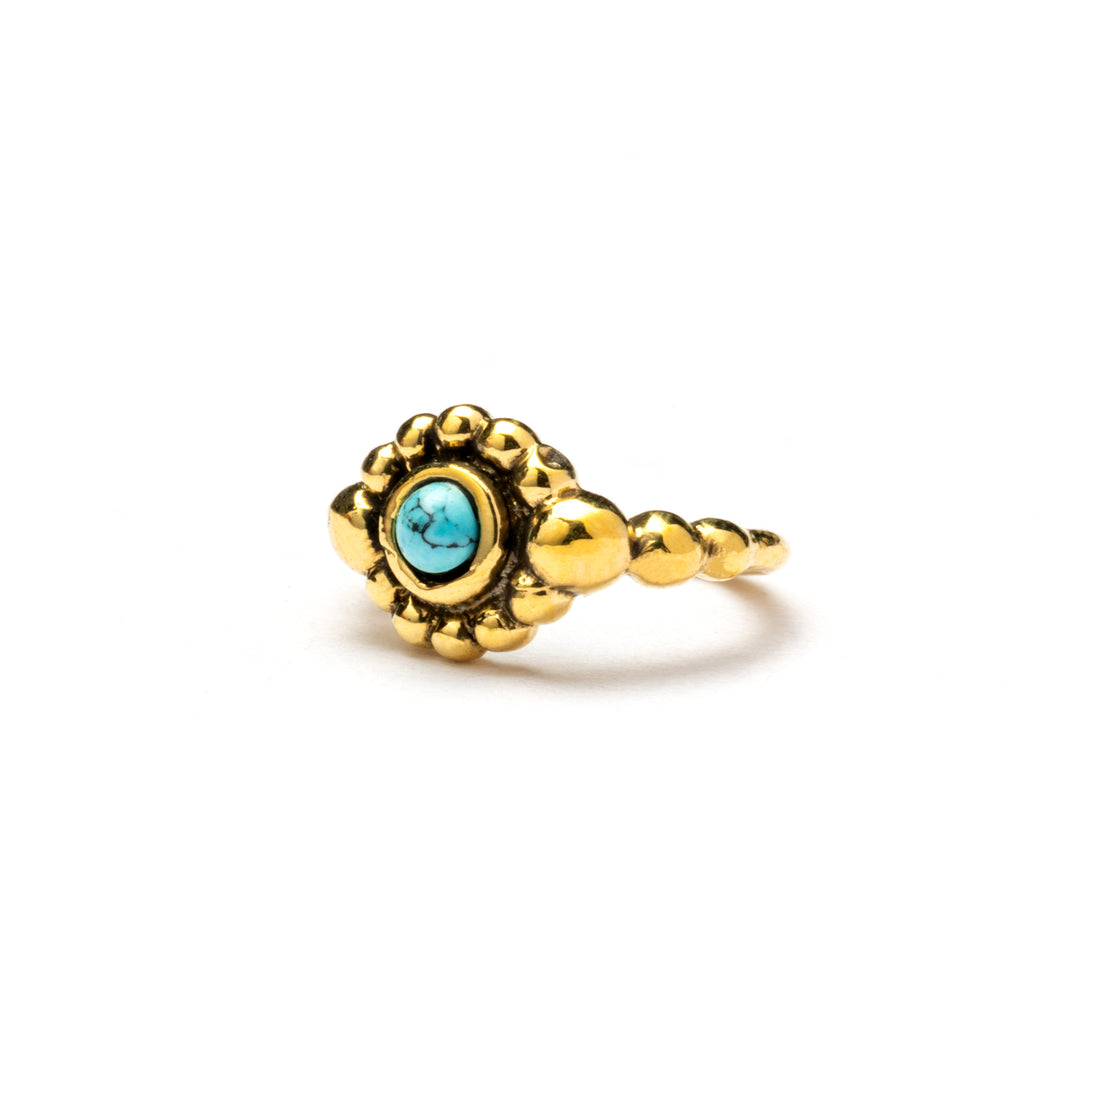 Flower Nose Ring With Turquoise right side view